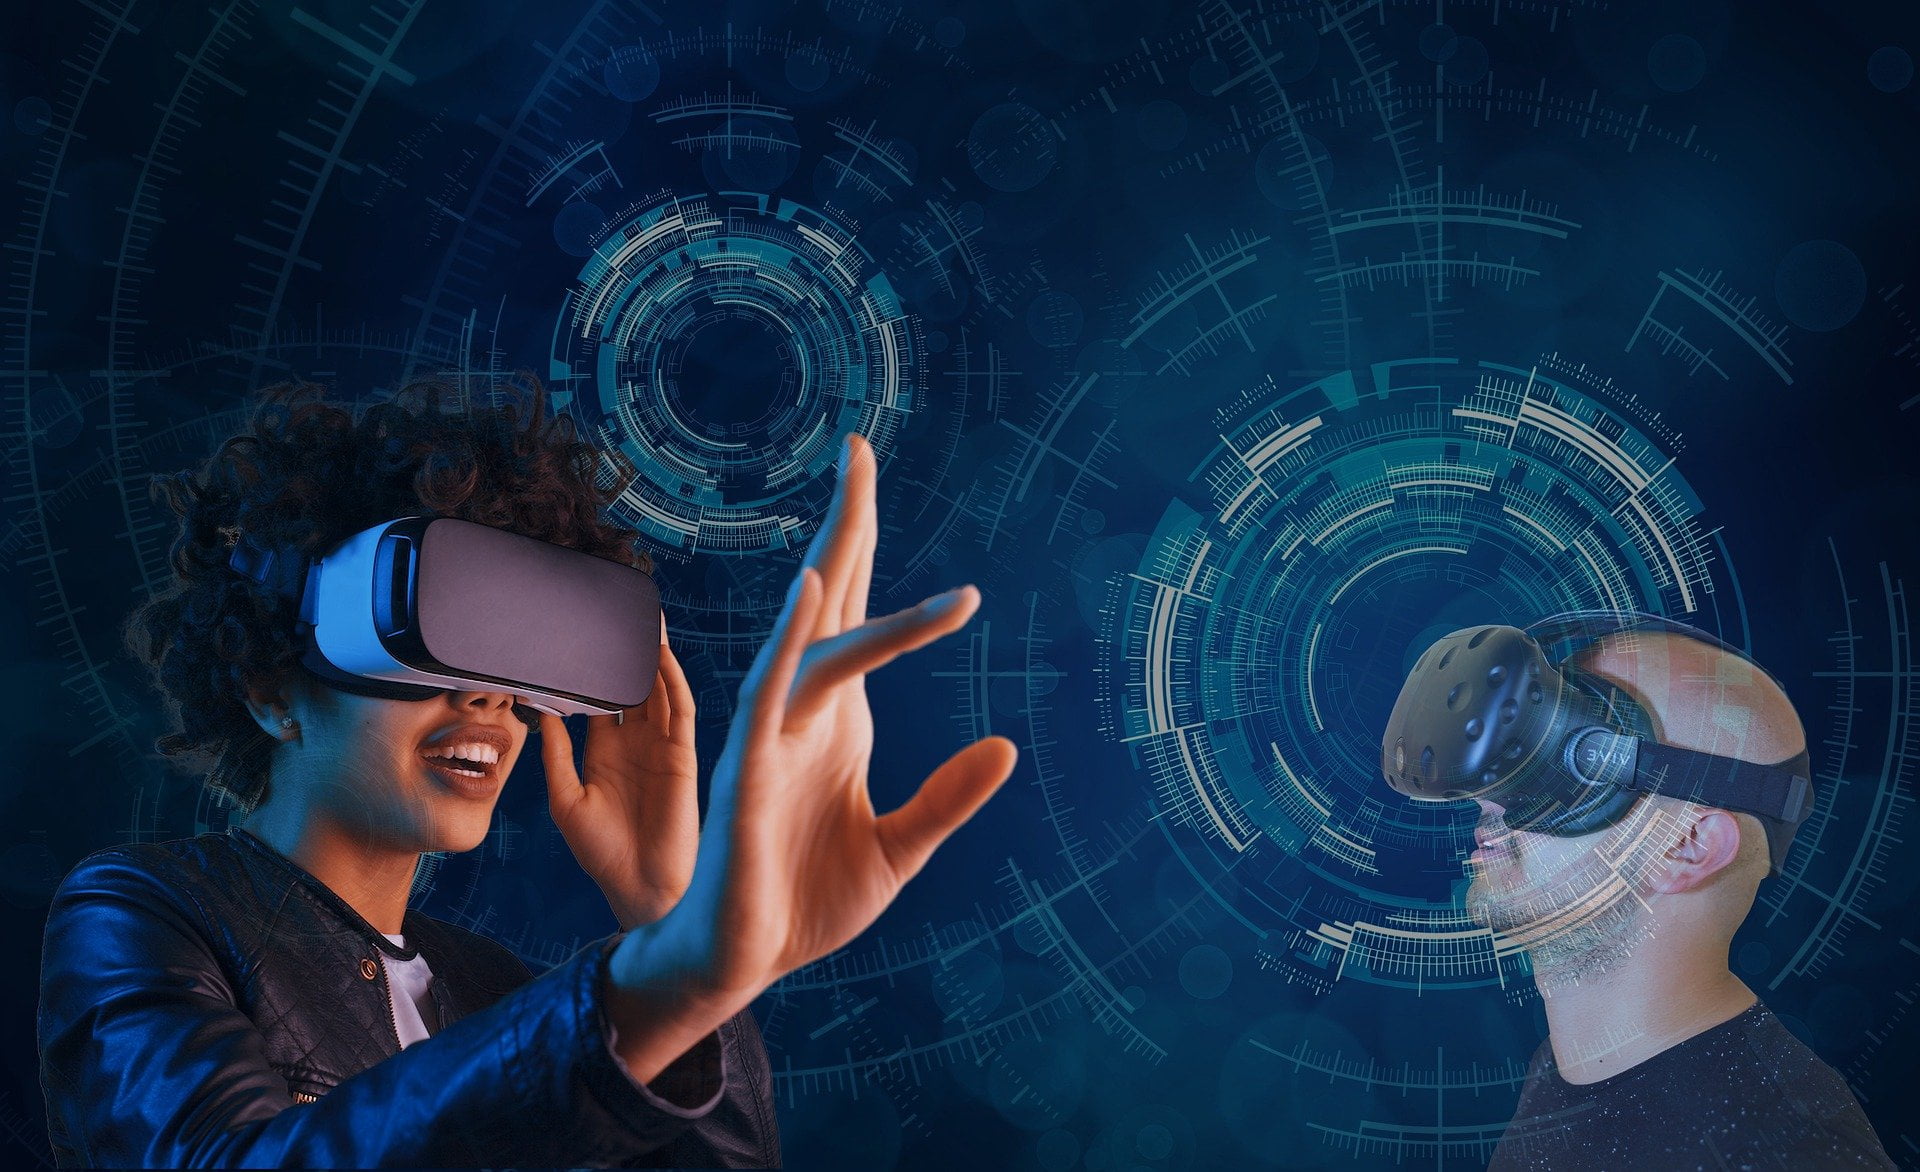 Image showing a woman wearing a VR headset and experiencing metaverse